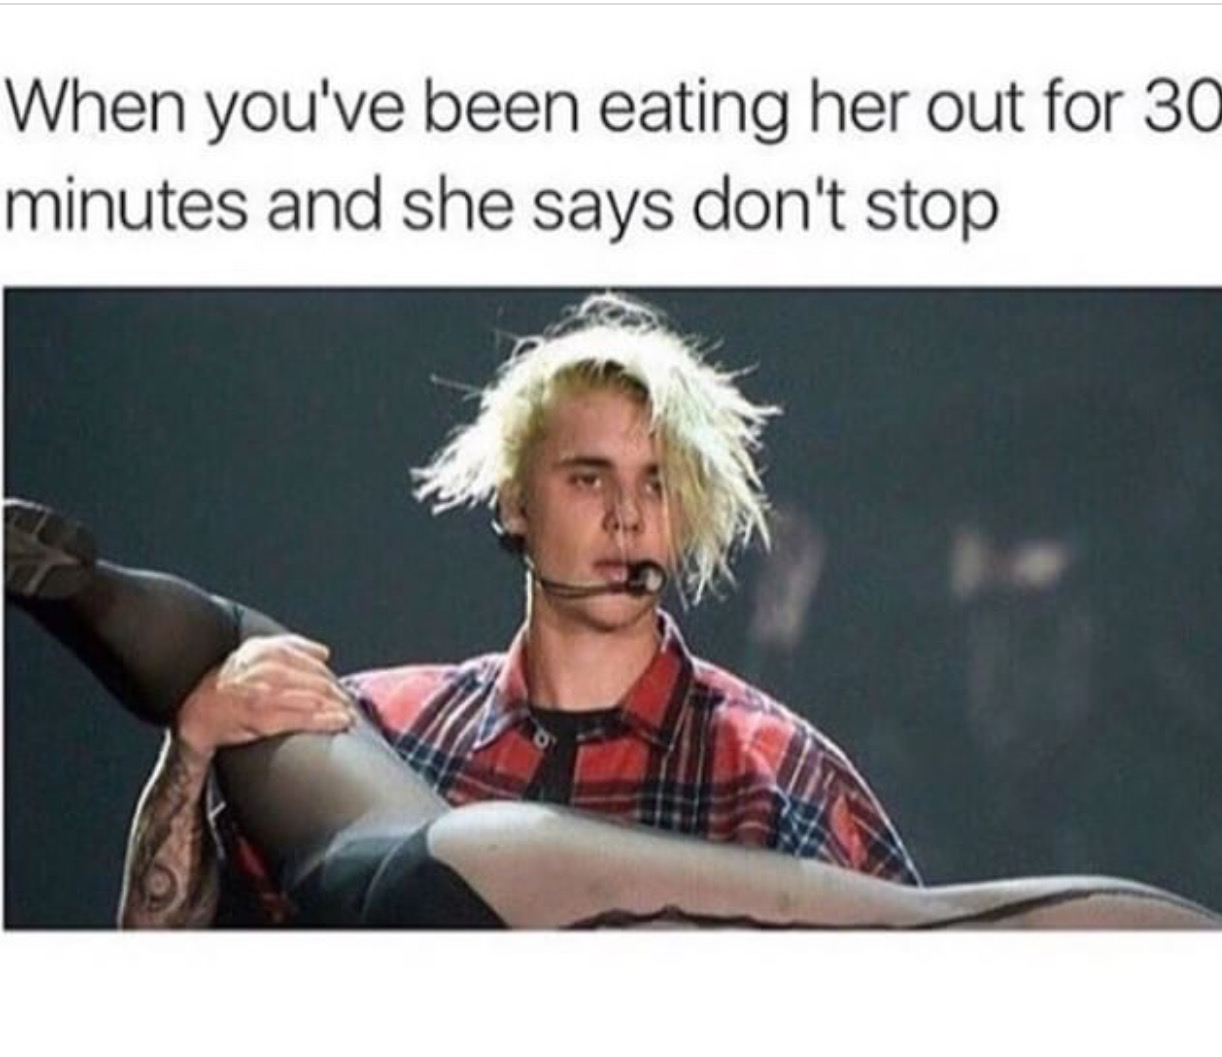 Dirty meme of Justin Bieber holding one of his dancers upside down and caption joking how it feels after 30 minutes of eating her out and she says don't stop, with his hair all over the place